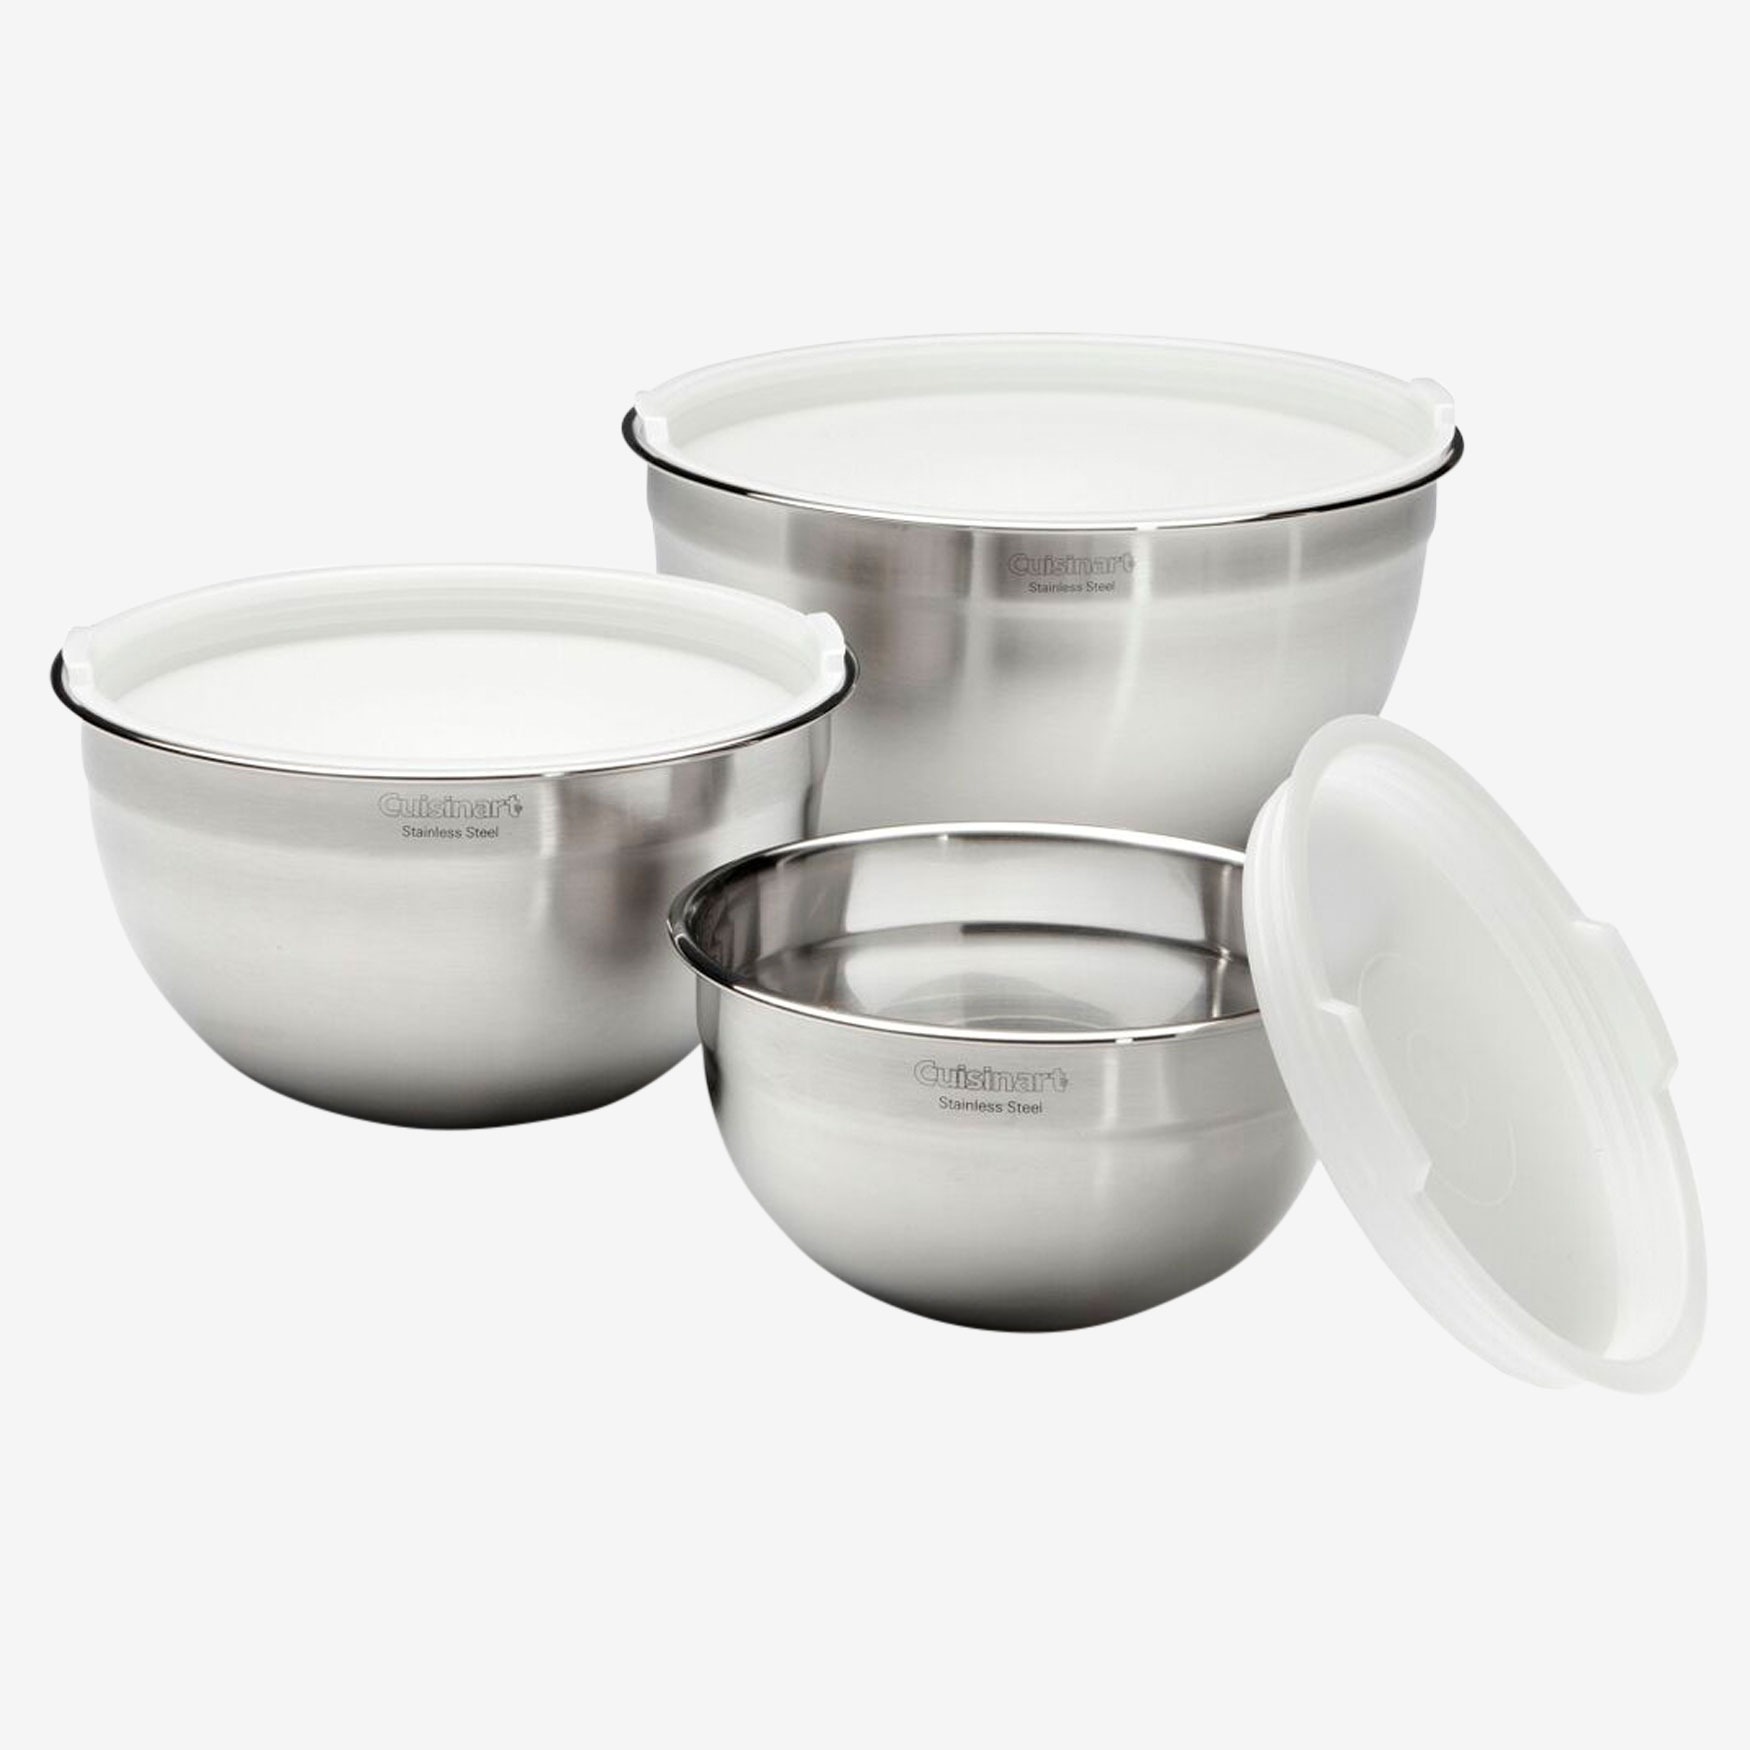 Cuisinart Stainless Steel Mixing Bowls with Lids, Set of 3, STAINLESS